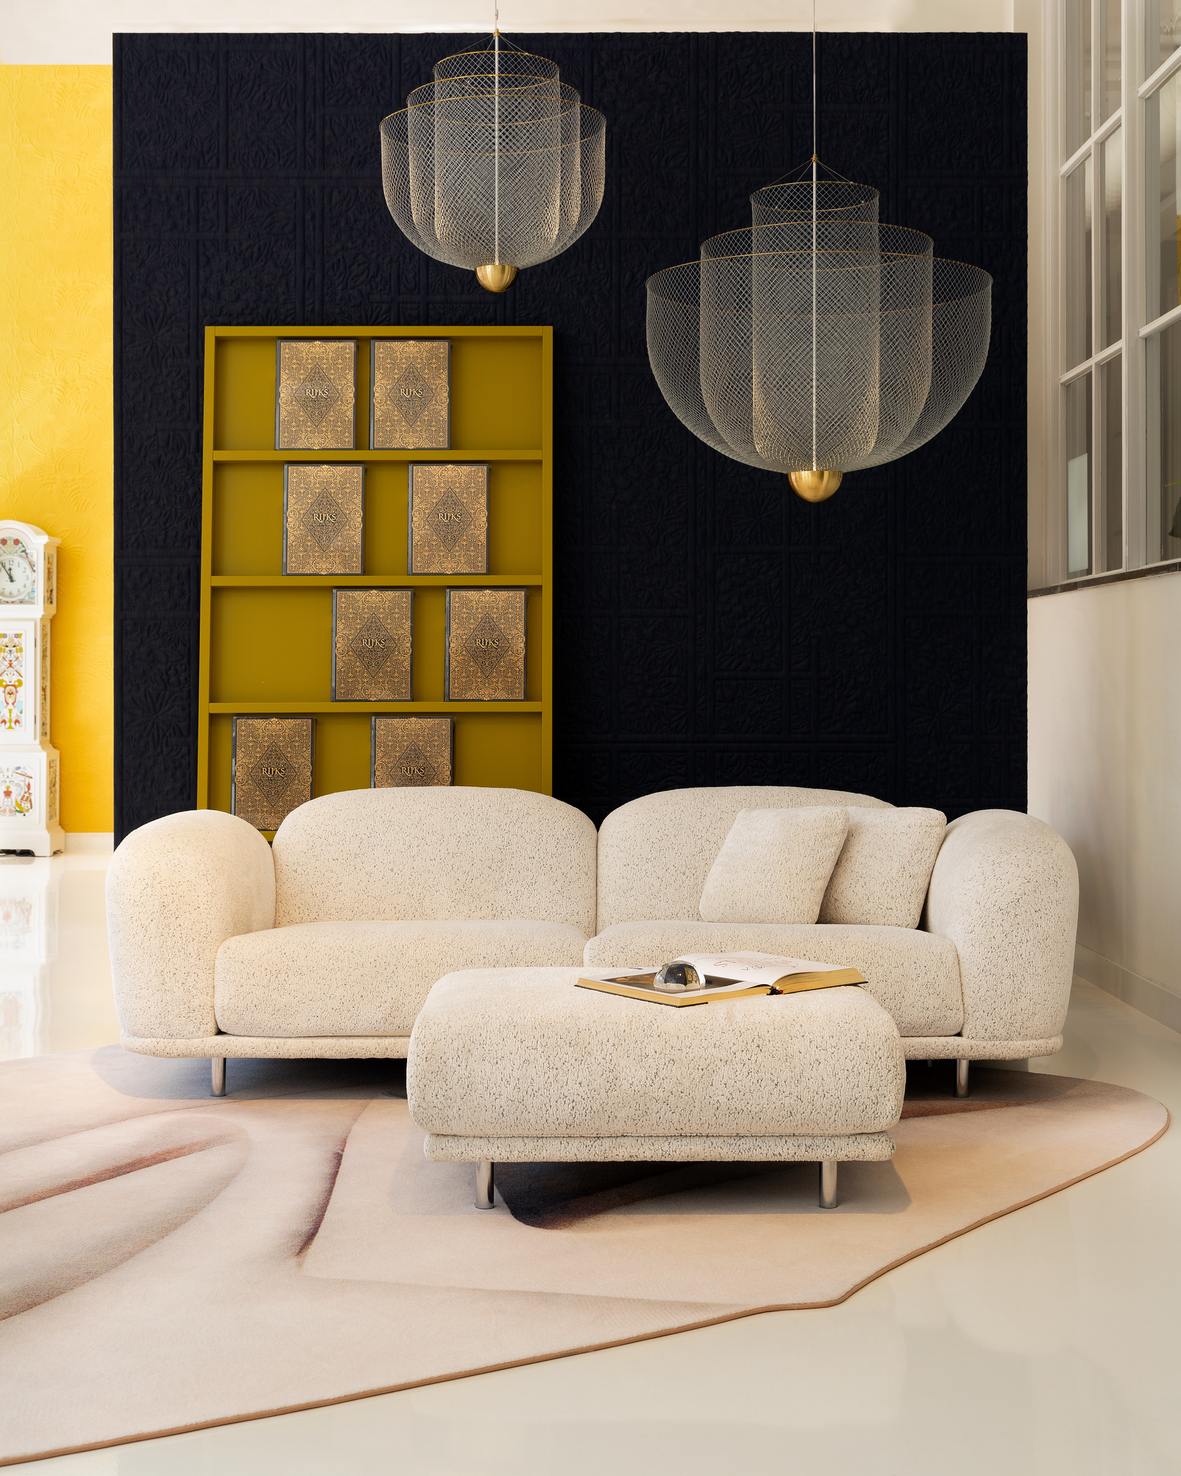 Amsterdam Brandstore interior setting with Cloud Sofa and Meshmatics Chandelier